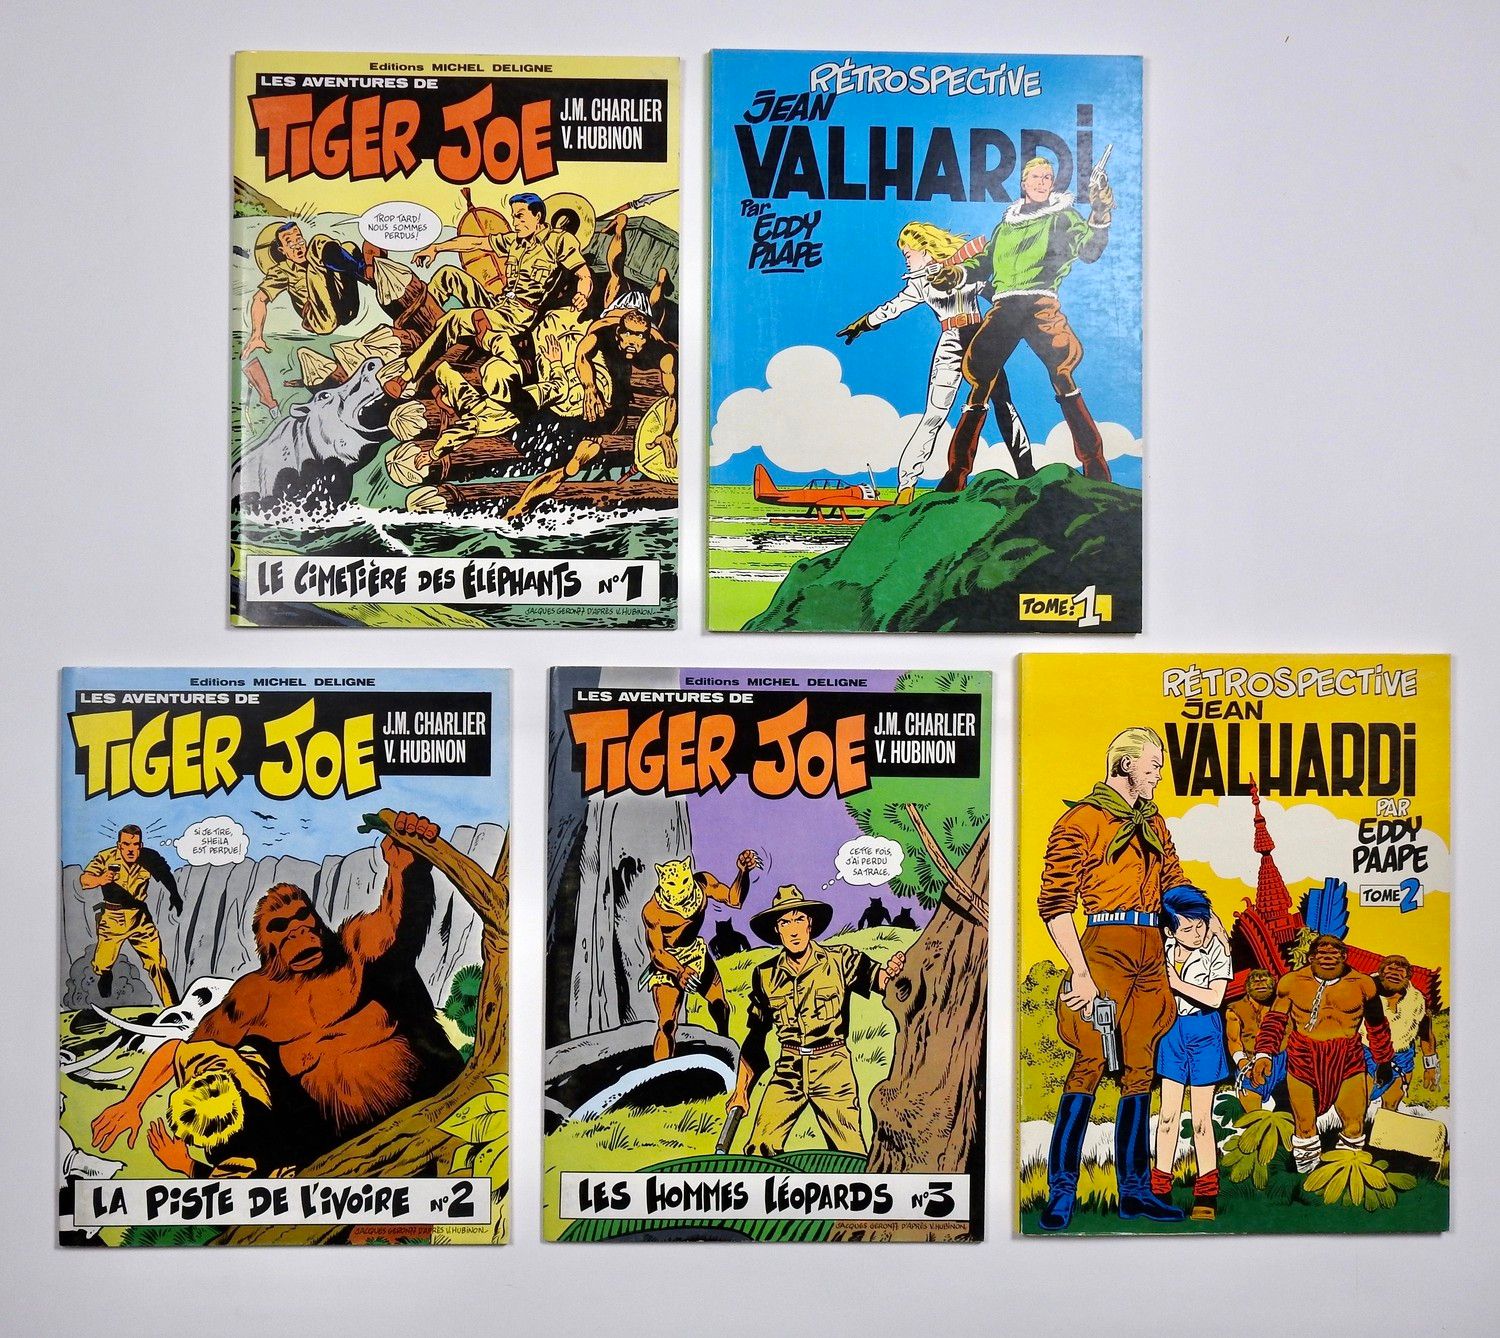 Null HUBINON
The adventures of Tiger Joe
Volumes 1 to 3 at Deligne in superb con&hellip;